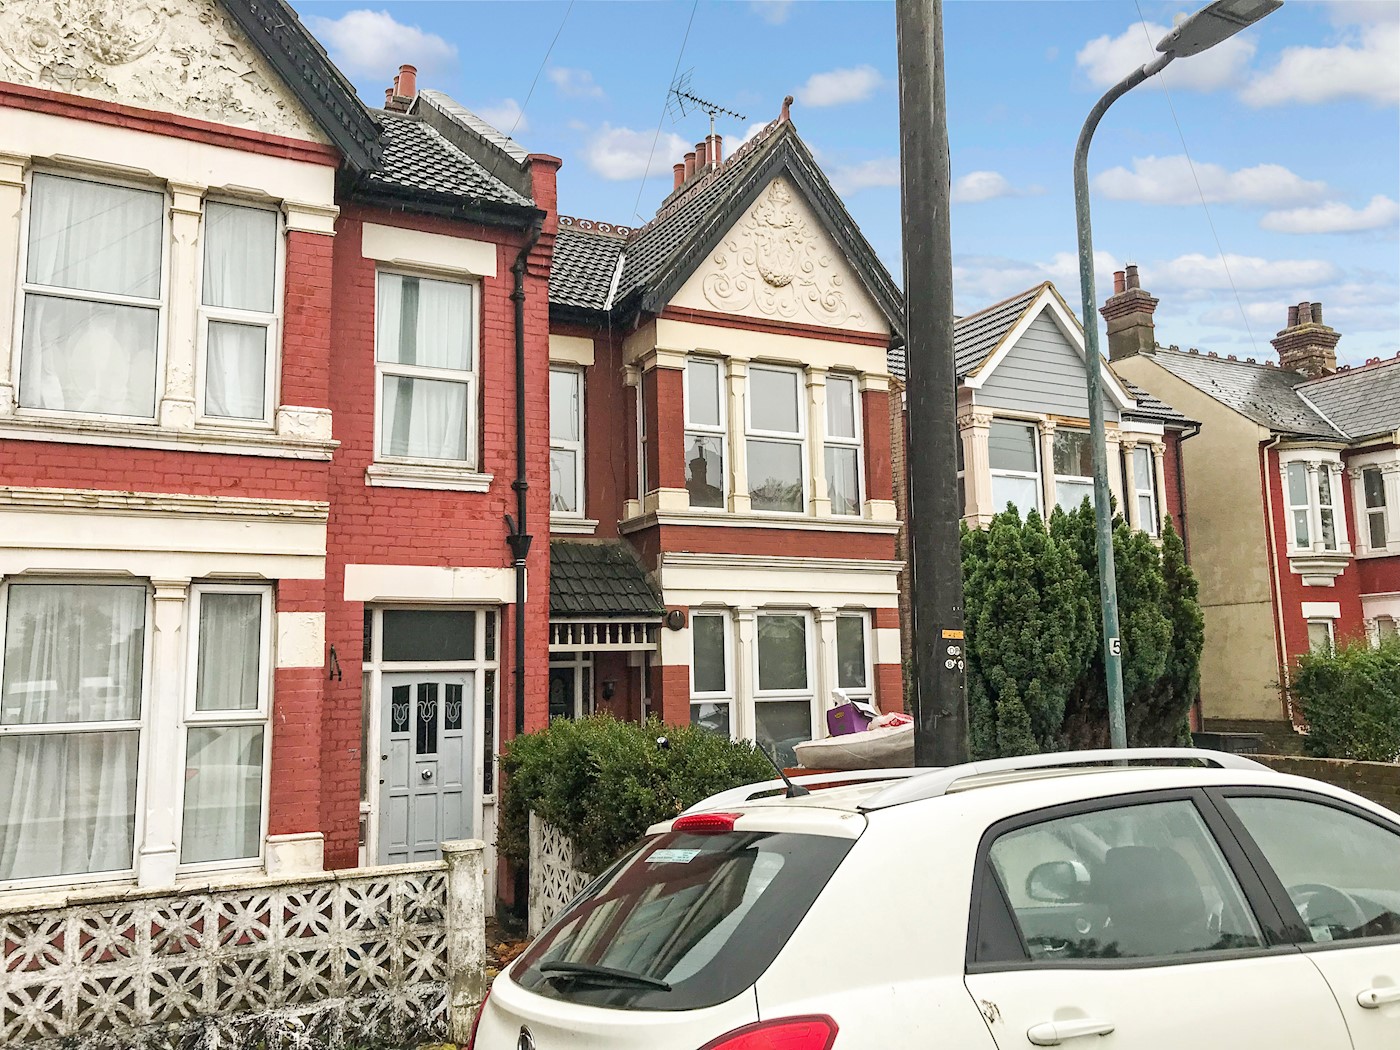 First Floor Flat, 9A Anerley Road, Westcliff-on-Sea, SS0 7HJ 1/14